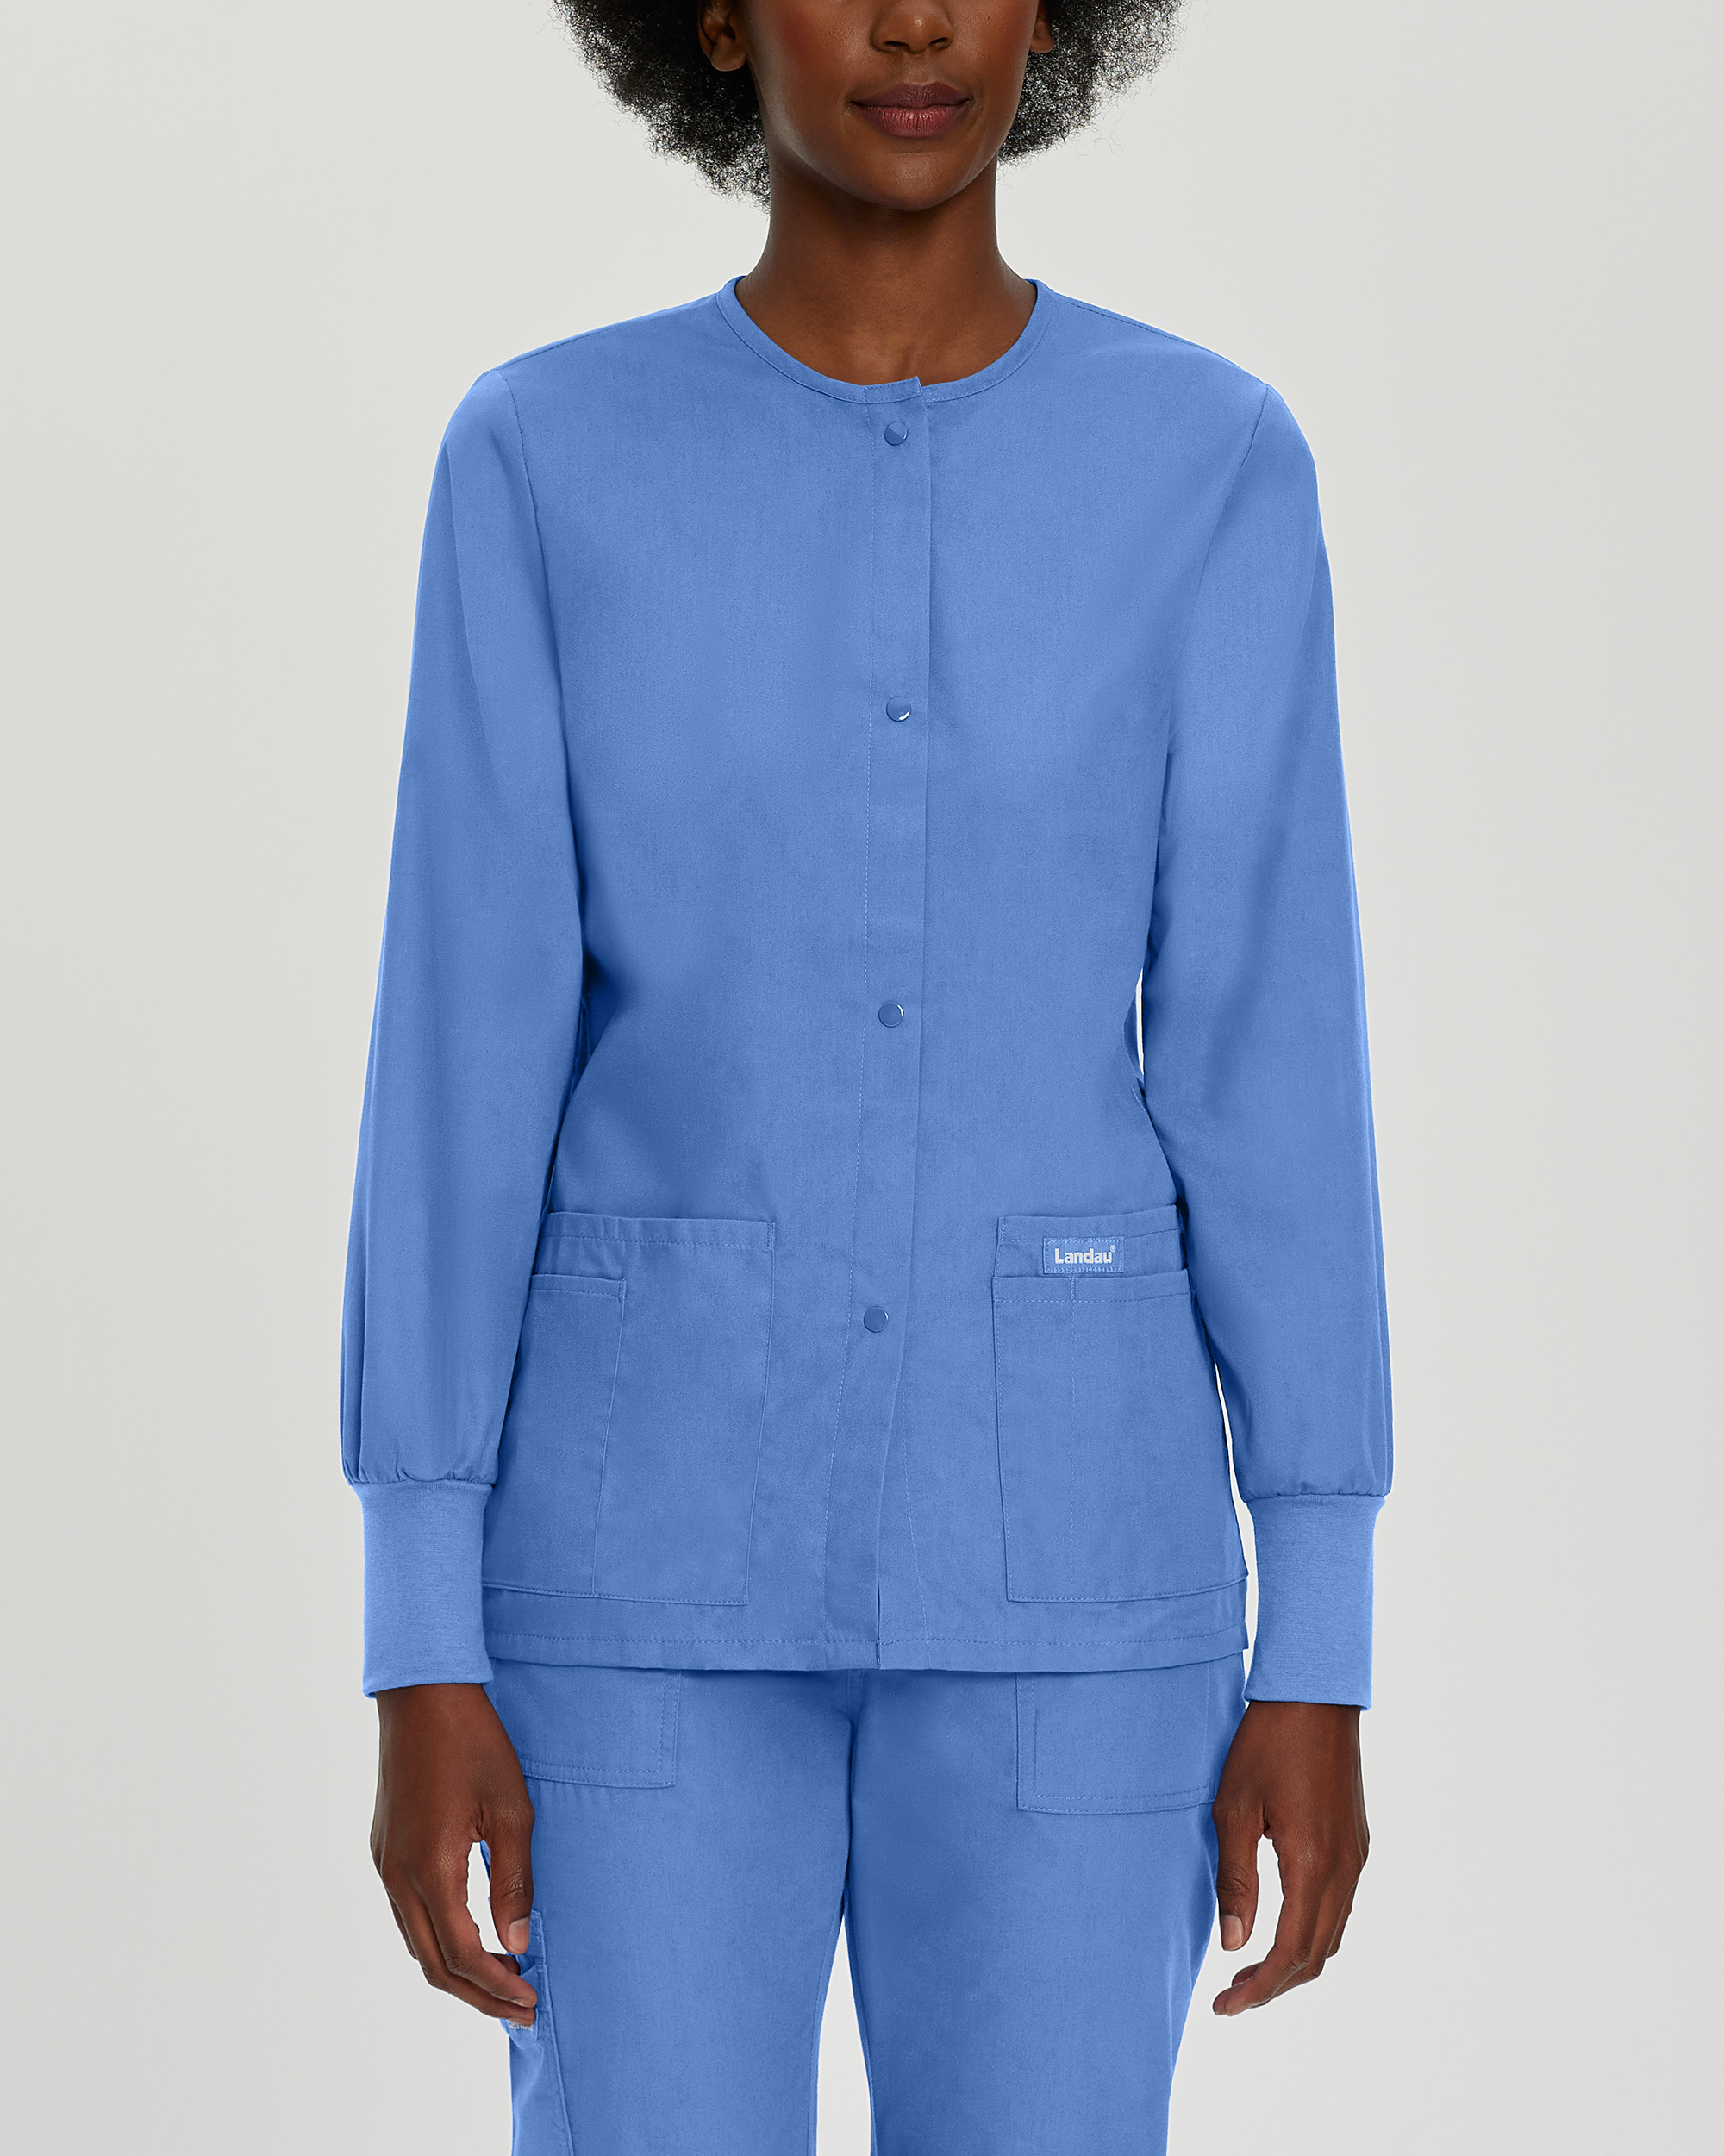 Landau Essentials Scrub Jacket for Women: Classic Relaxed Fit Crew Neck, Snap Front, Knit Cuffs, 4 Pocket 7525 Questions & Answers